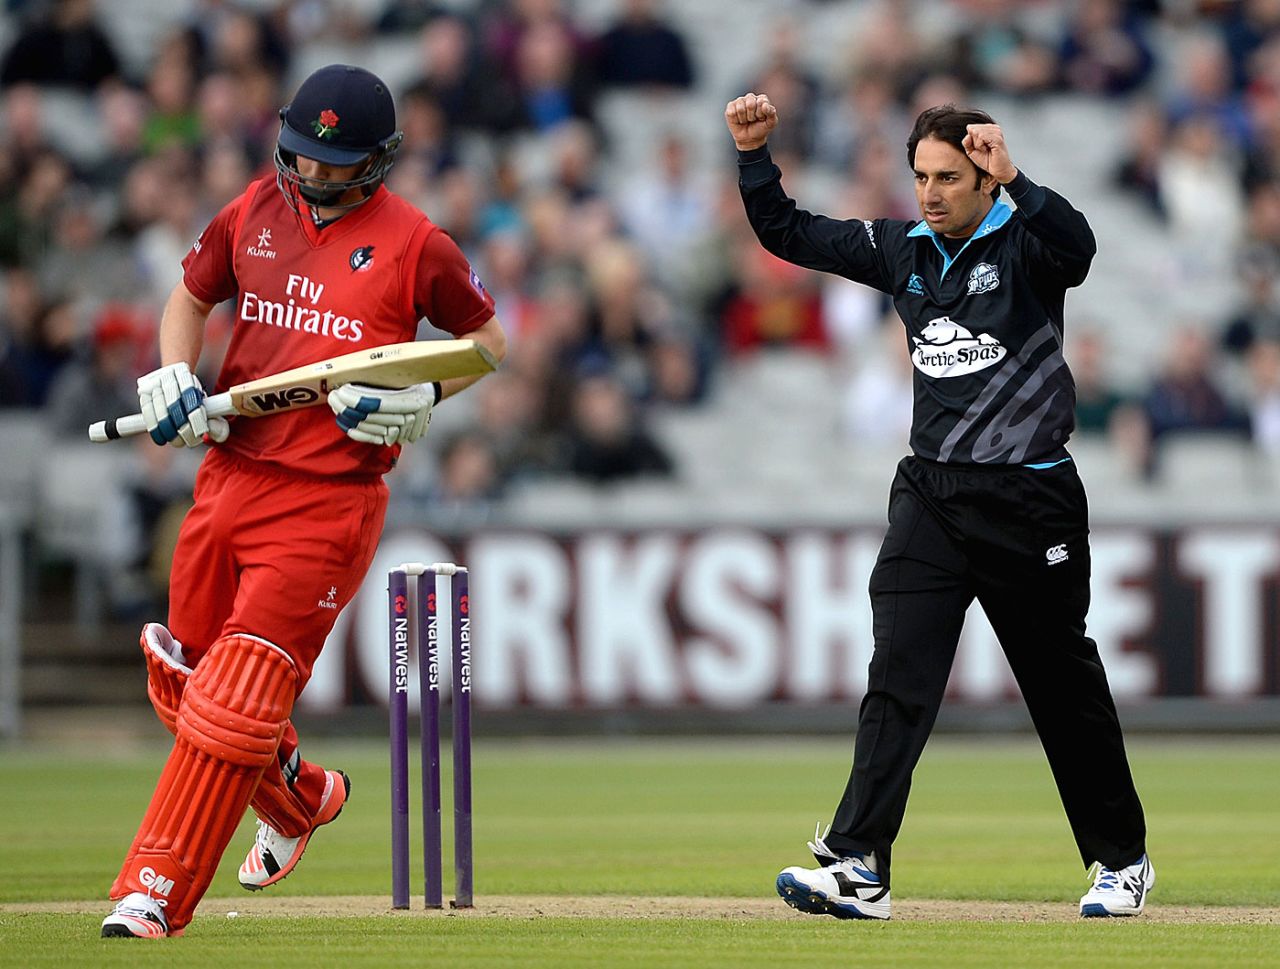 Saeed Ajmal takes a wicket for Worcestershire, Lancashire v Worcestershire, Natwest T20 Blast, Old Trafford, June 18, 2015